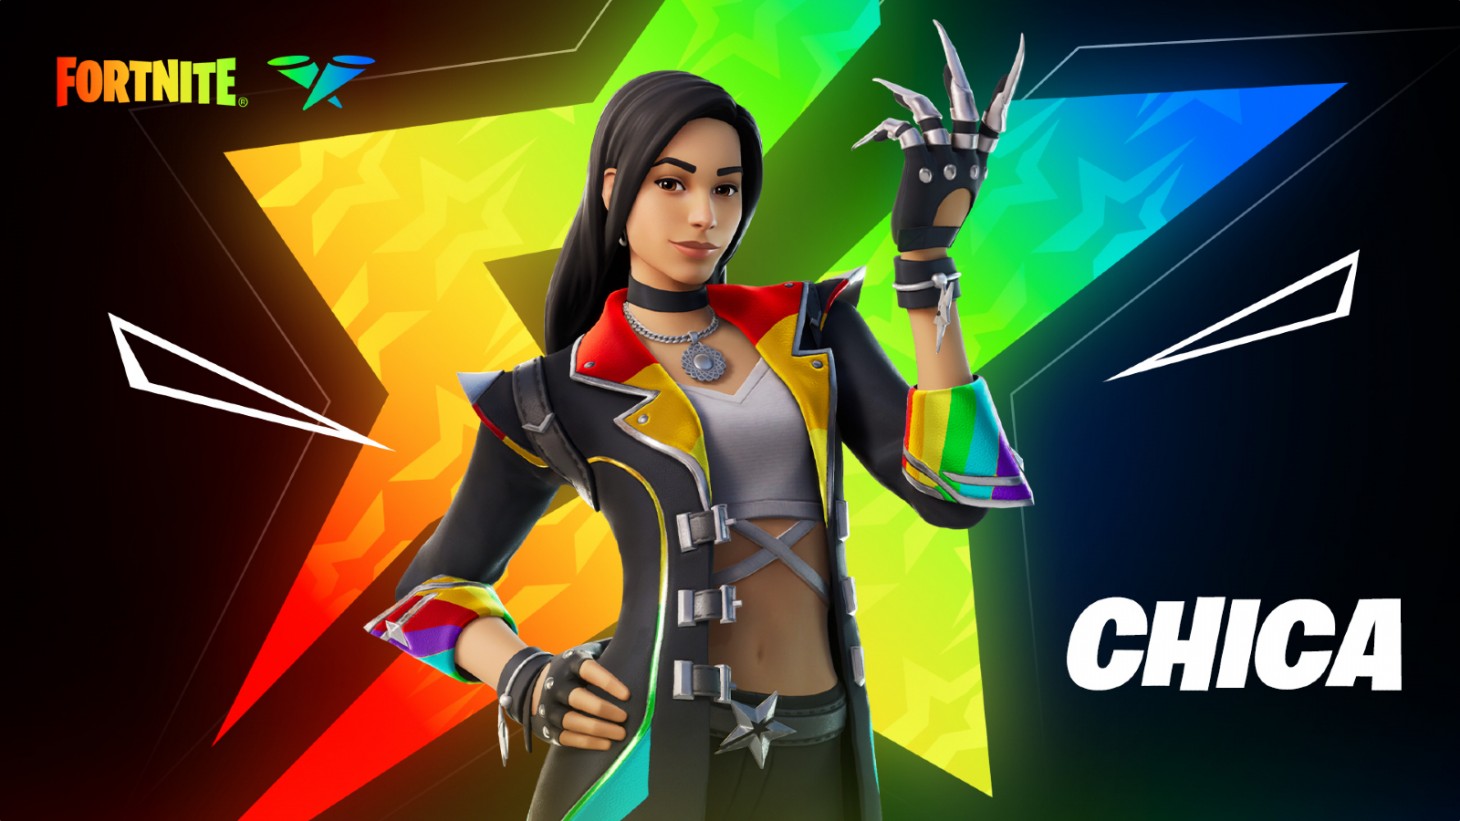 Maria 'Chica' Lopez Joins The Fortnite Icon Series With New In